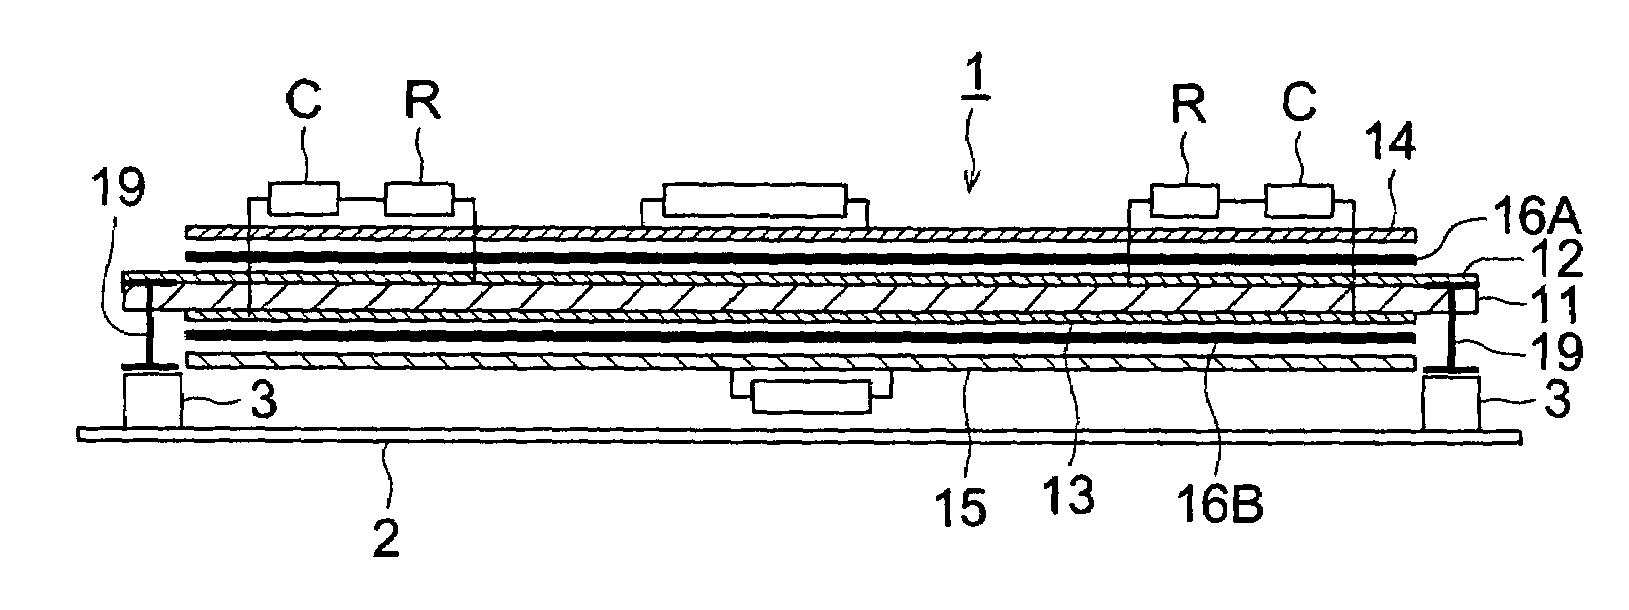 Printed circuit board and method for installing printed circuit board onto electro-conductive housing